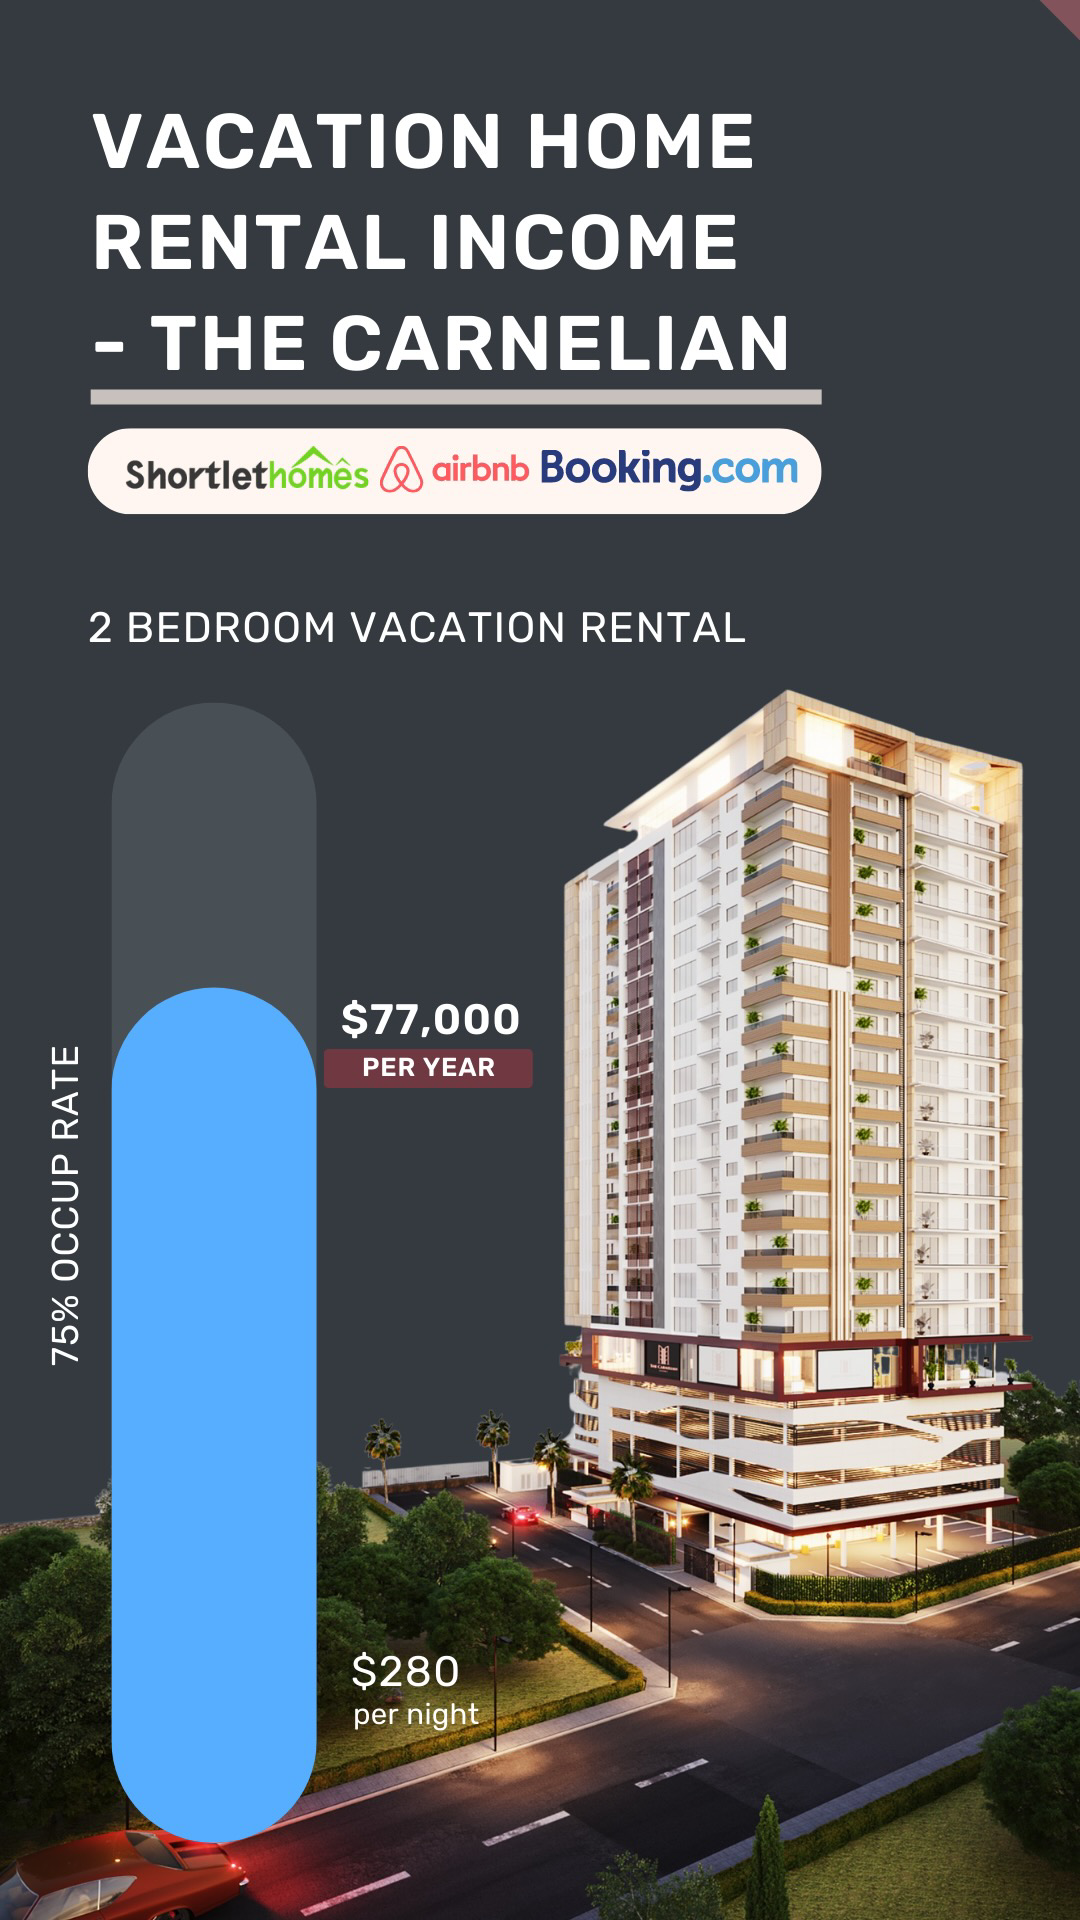 Rental income projection on a 2-bedroom apartment at the Carnelian